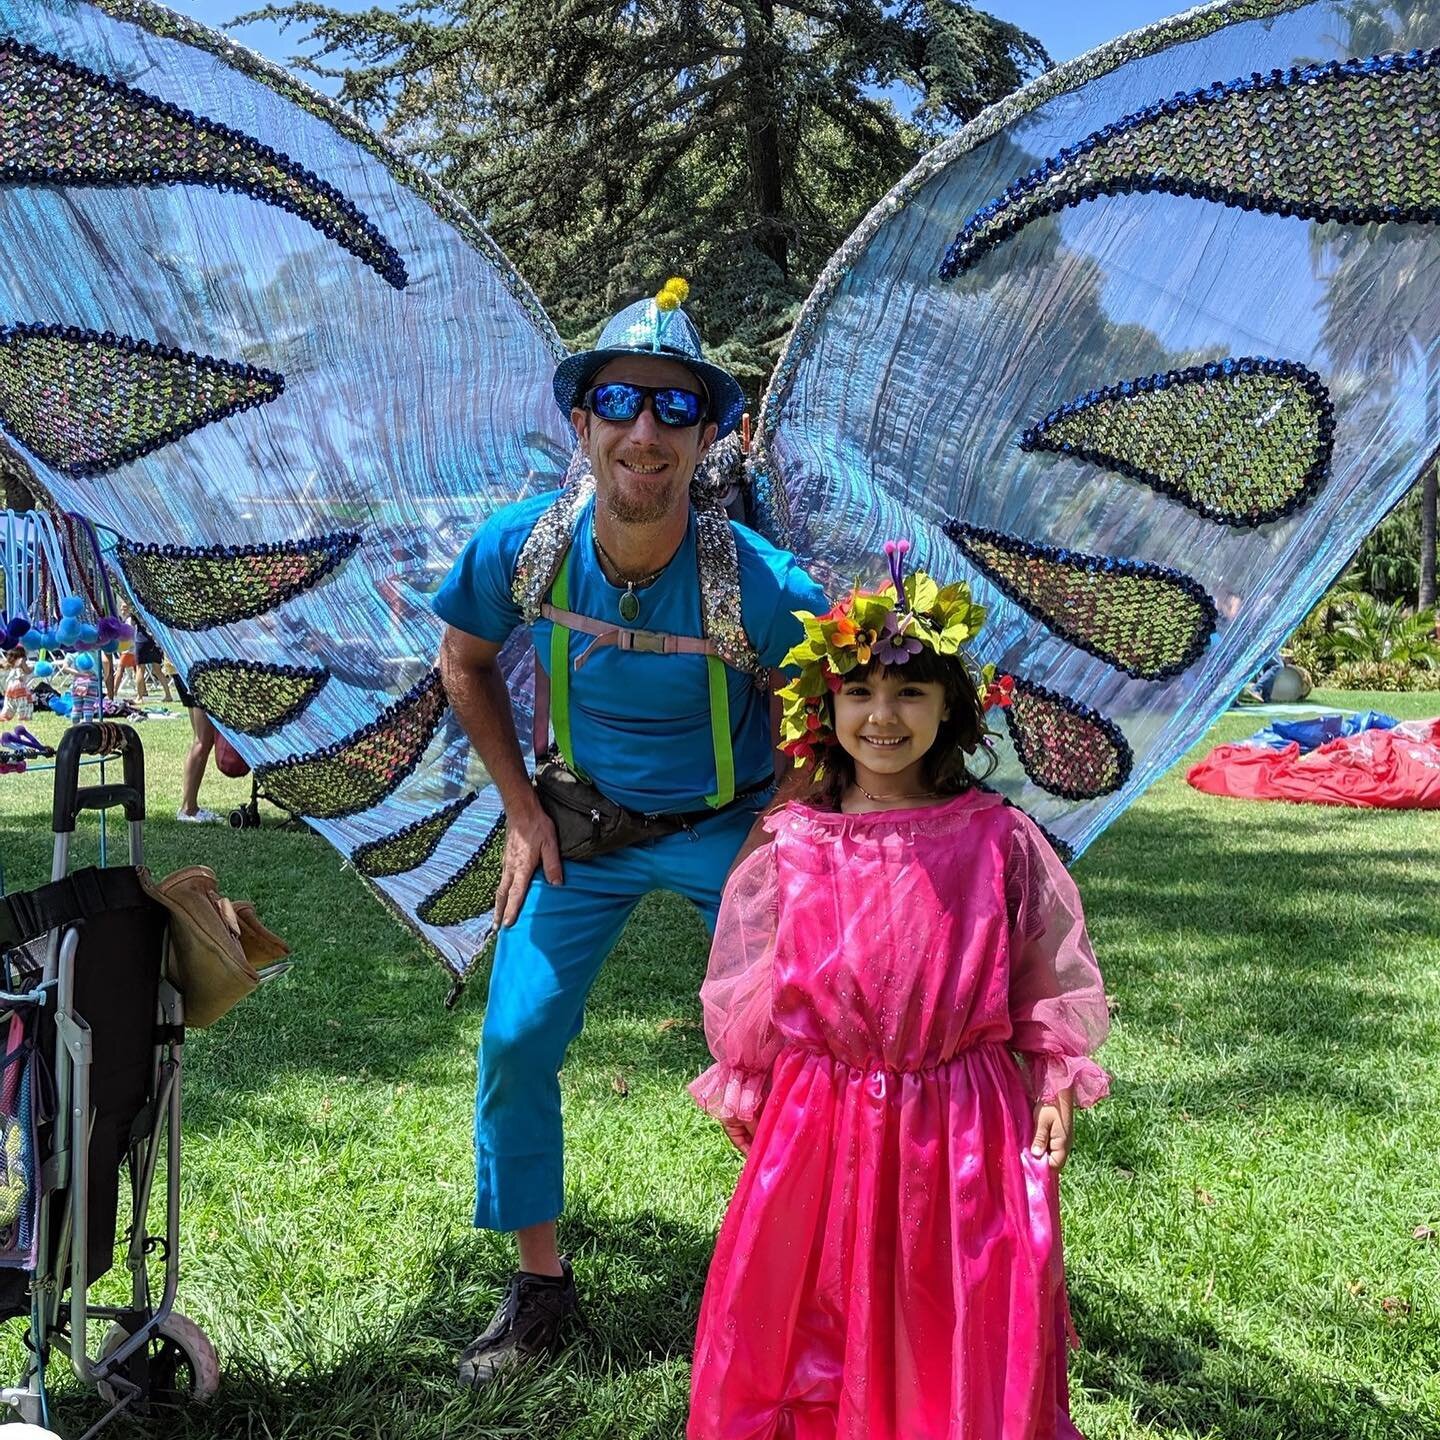 Arts for Humanity! had so much fun bringing our &quot;Create a Costume &amp; Portrait&quot; booth to the Summer Solstice Children's Celebration this year!